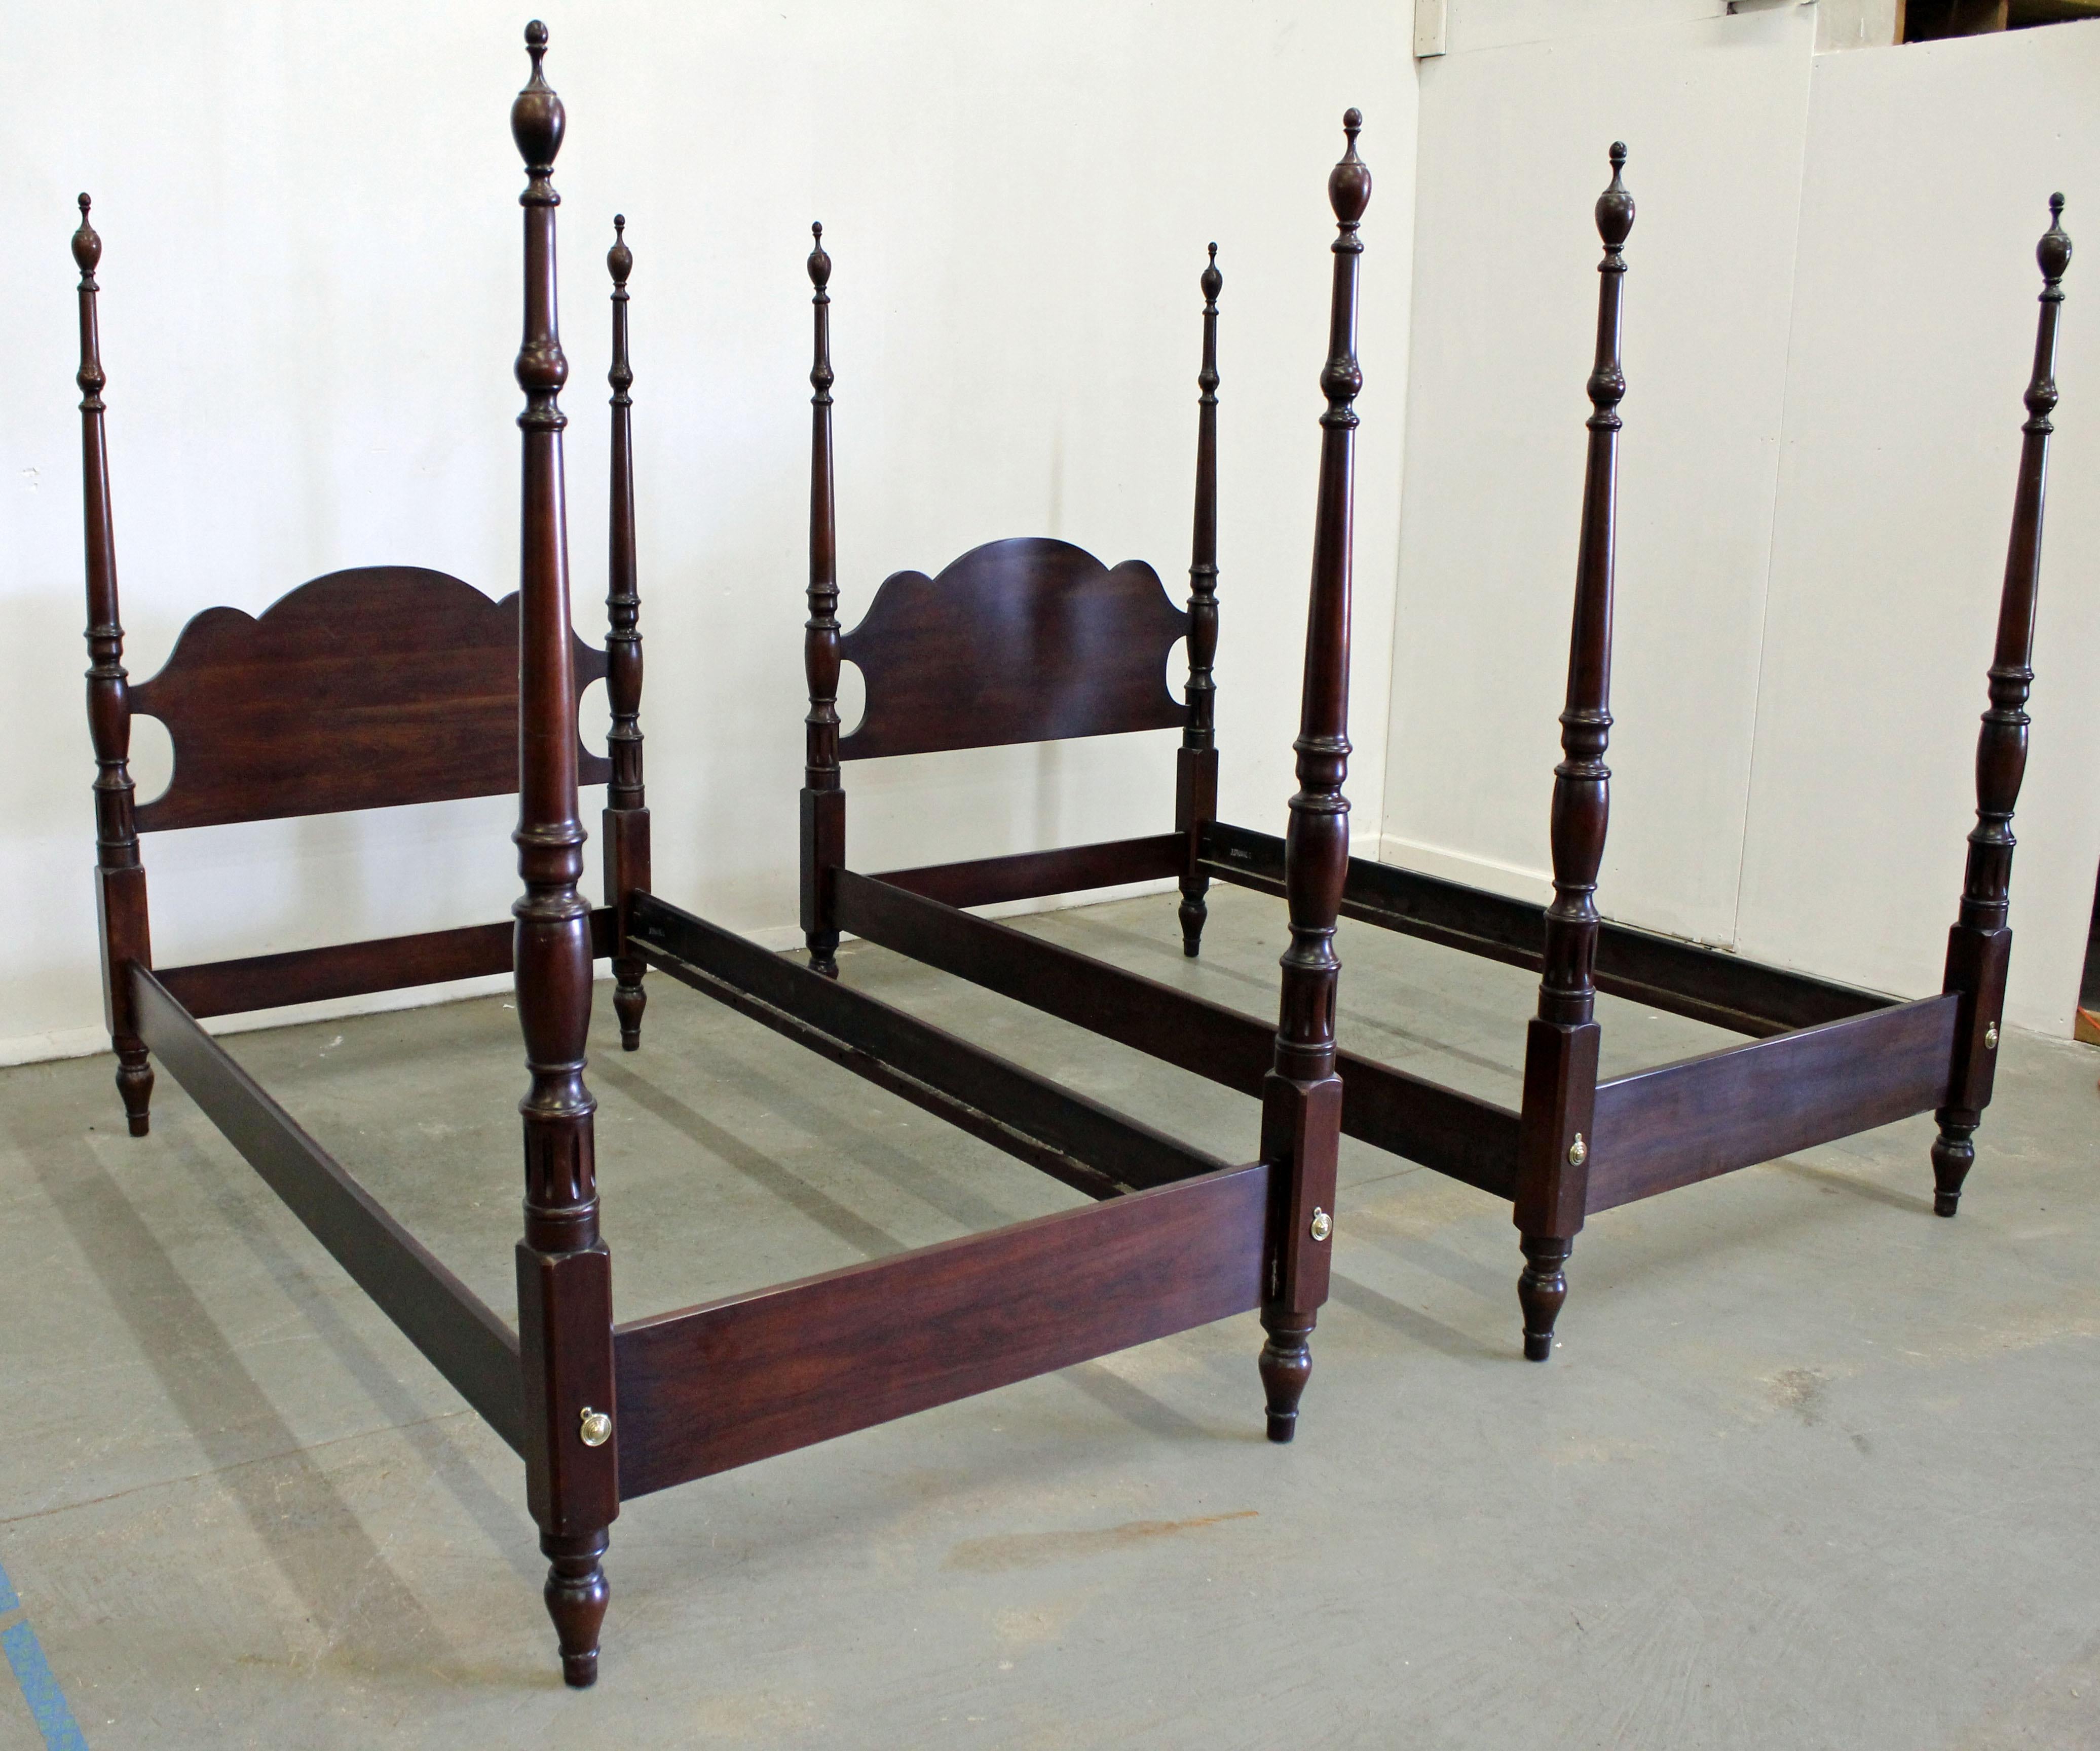 Offered is a pair of vintage Chippendale twin size beds by Statton 'Old Towne'. Includes two bed frames with slats, both made of cherry with four posters. In good, structurally sound condition with some age wear. This piece came out of a local